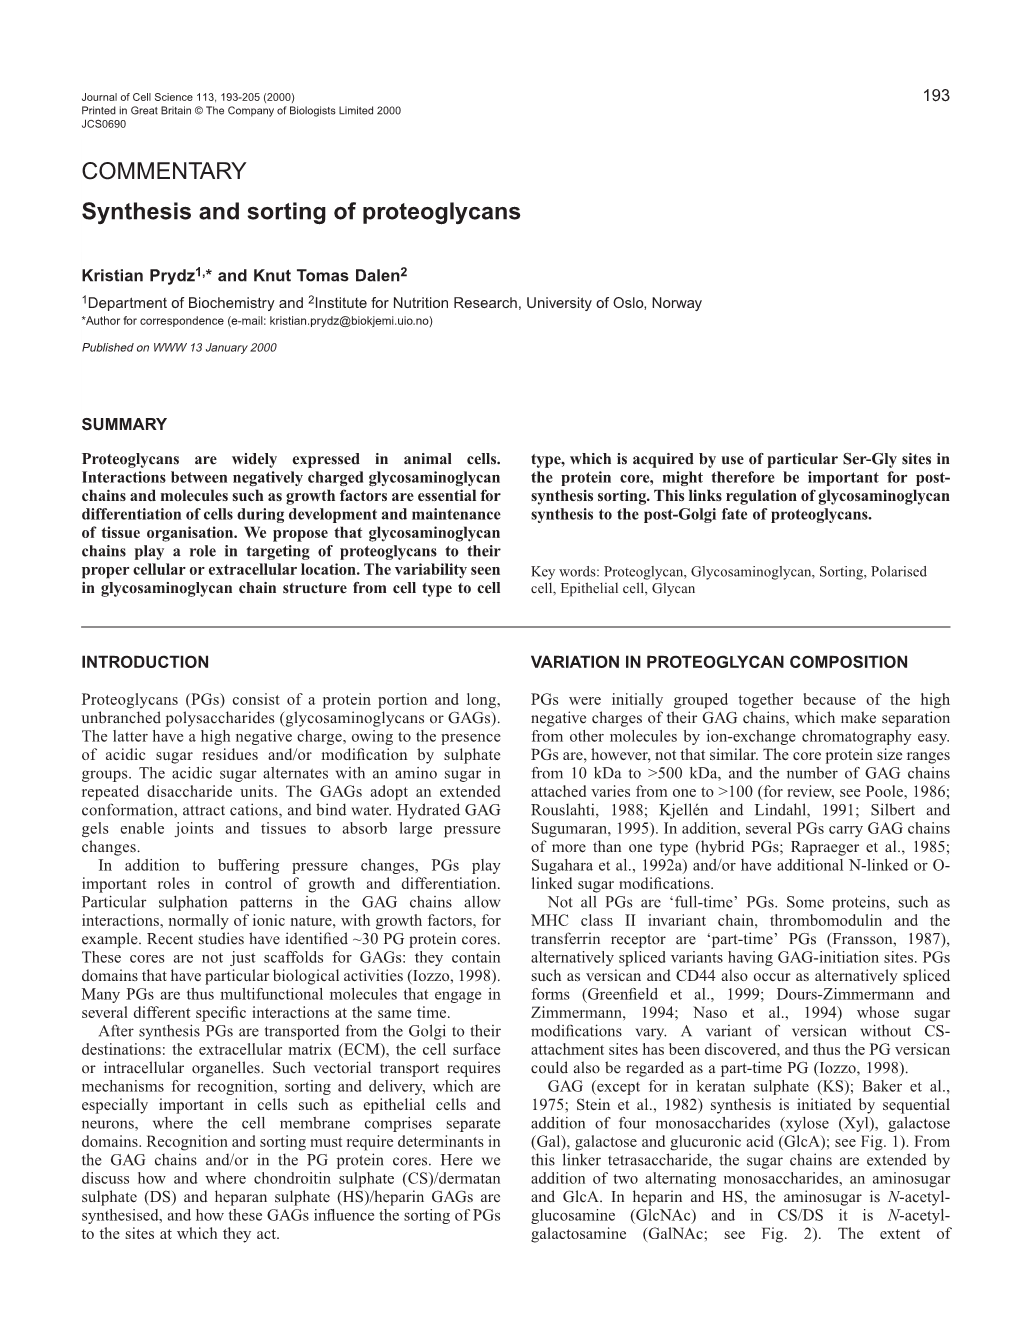 Synthesis and Sorting of Proteoglycans